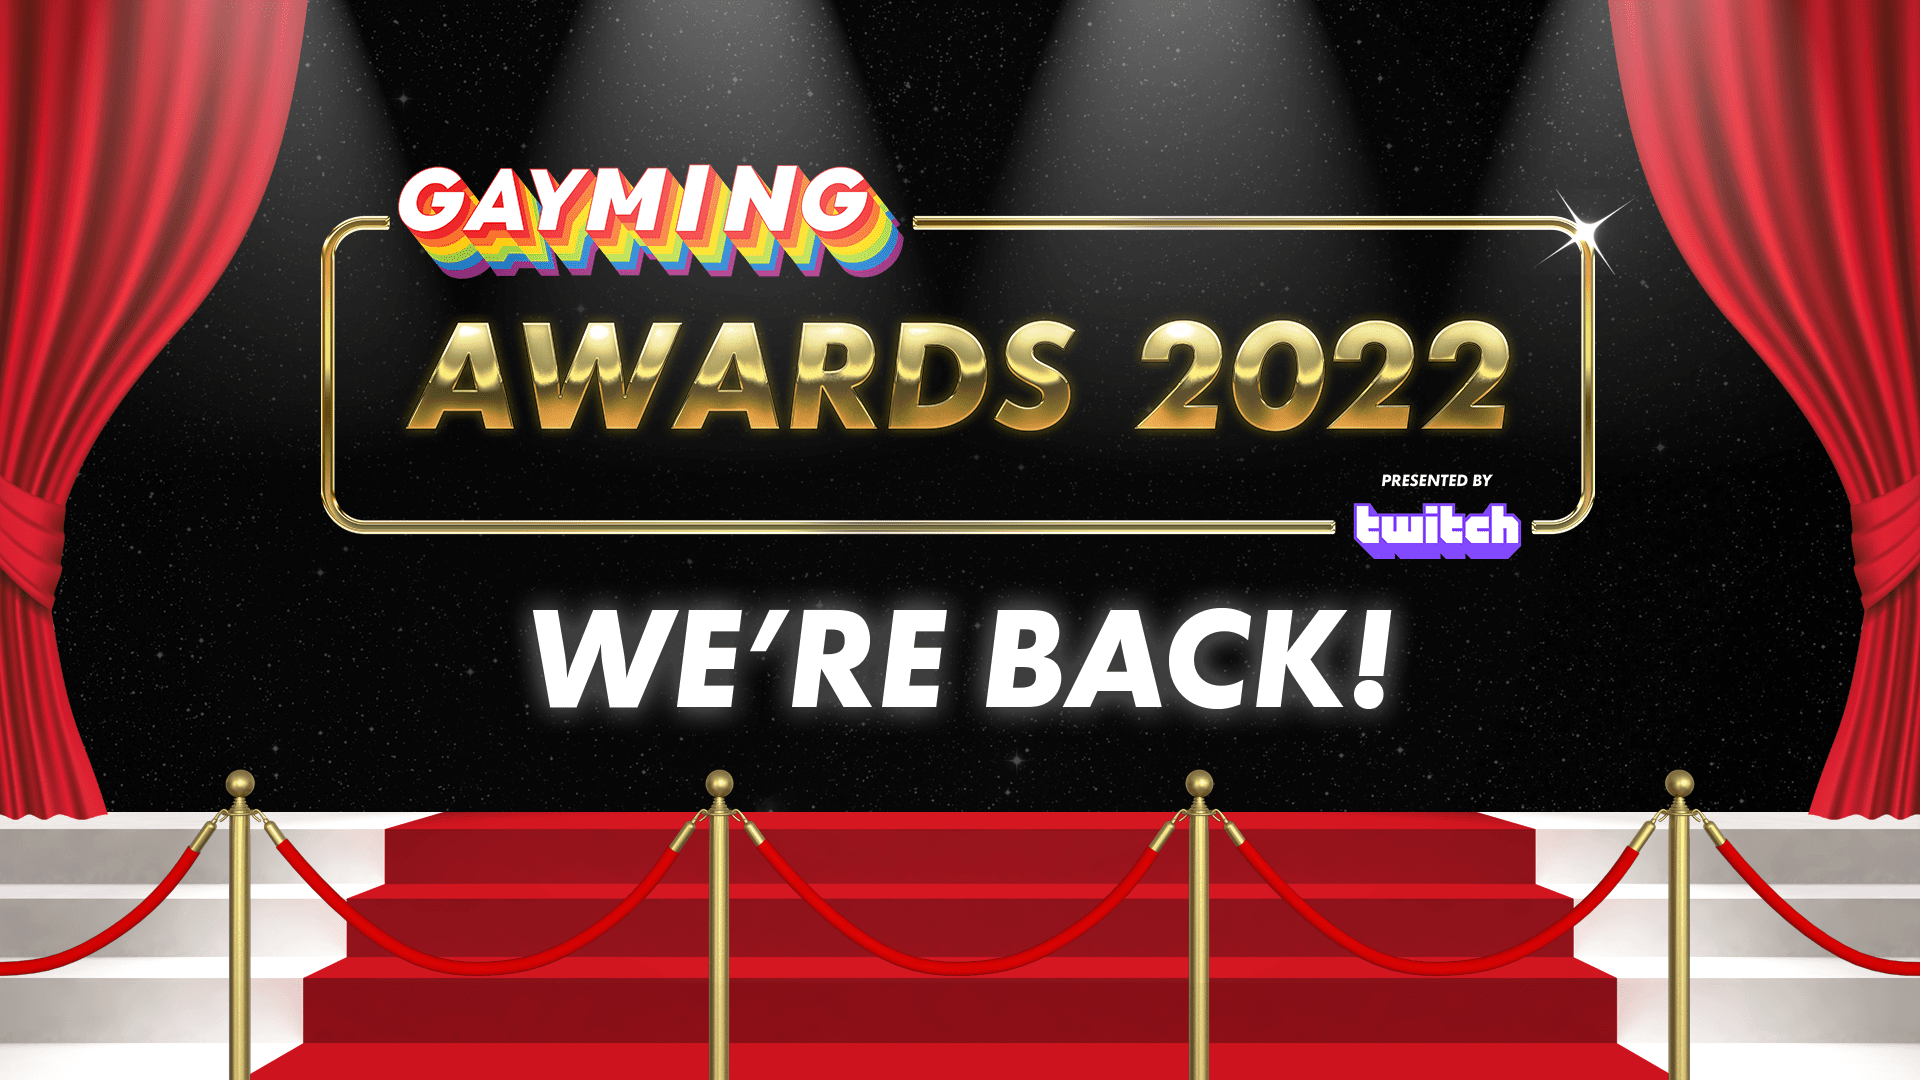 Gayming Awards returns in person for 2022 with longterm presenting